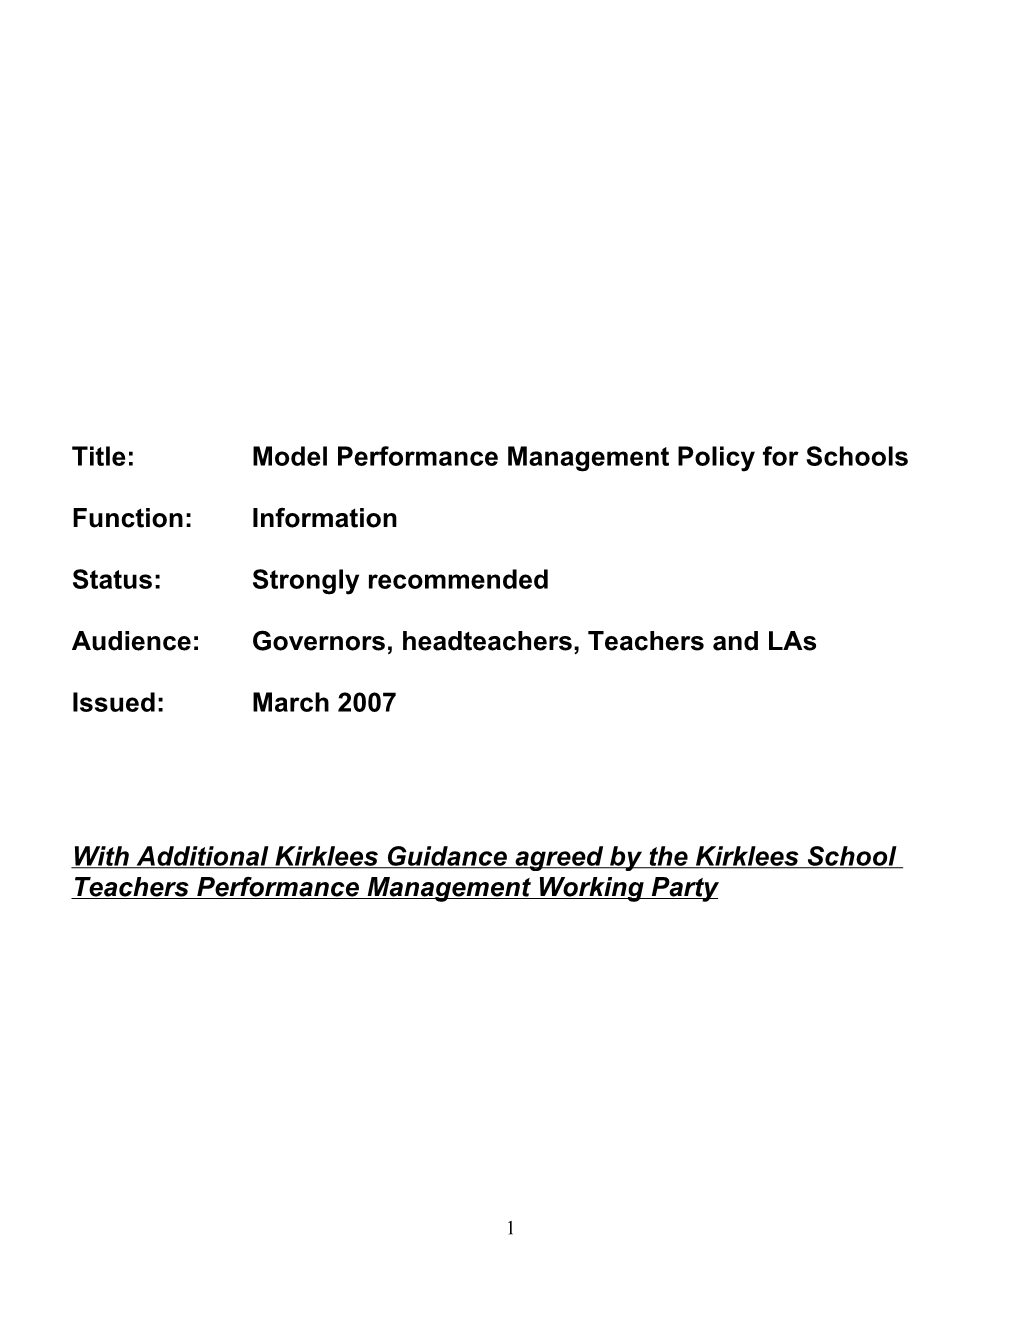 Title: Model Performance Management Policy for Schools